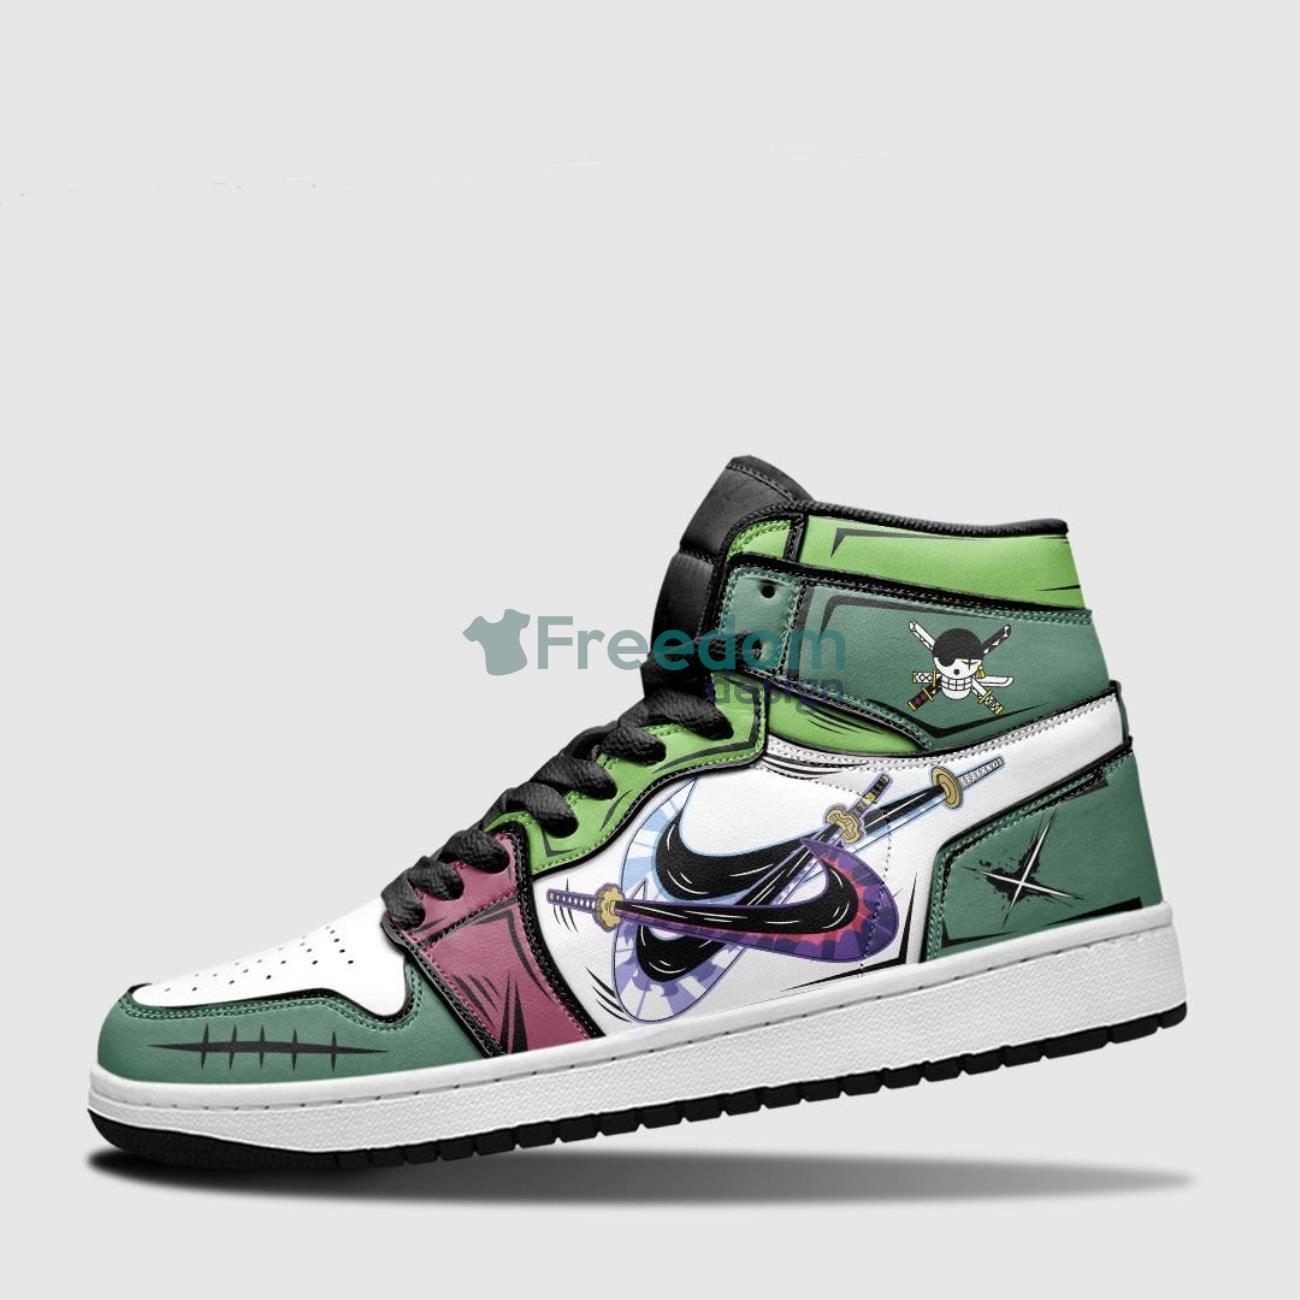 Zoro High Top Converse Shoes One Piece Custom Shoes - Official One